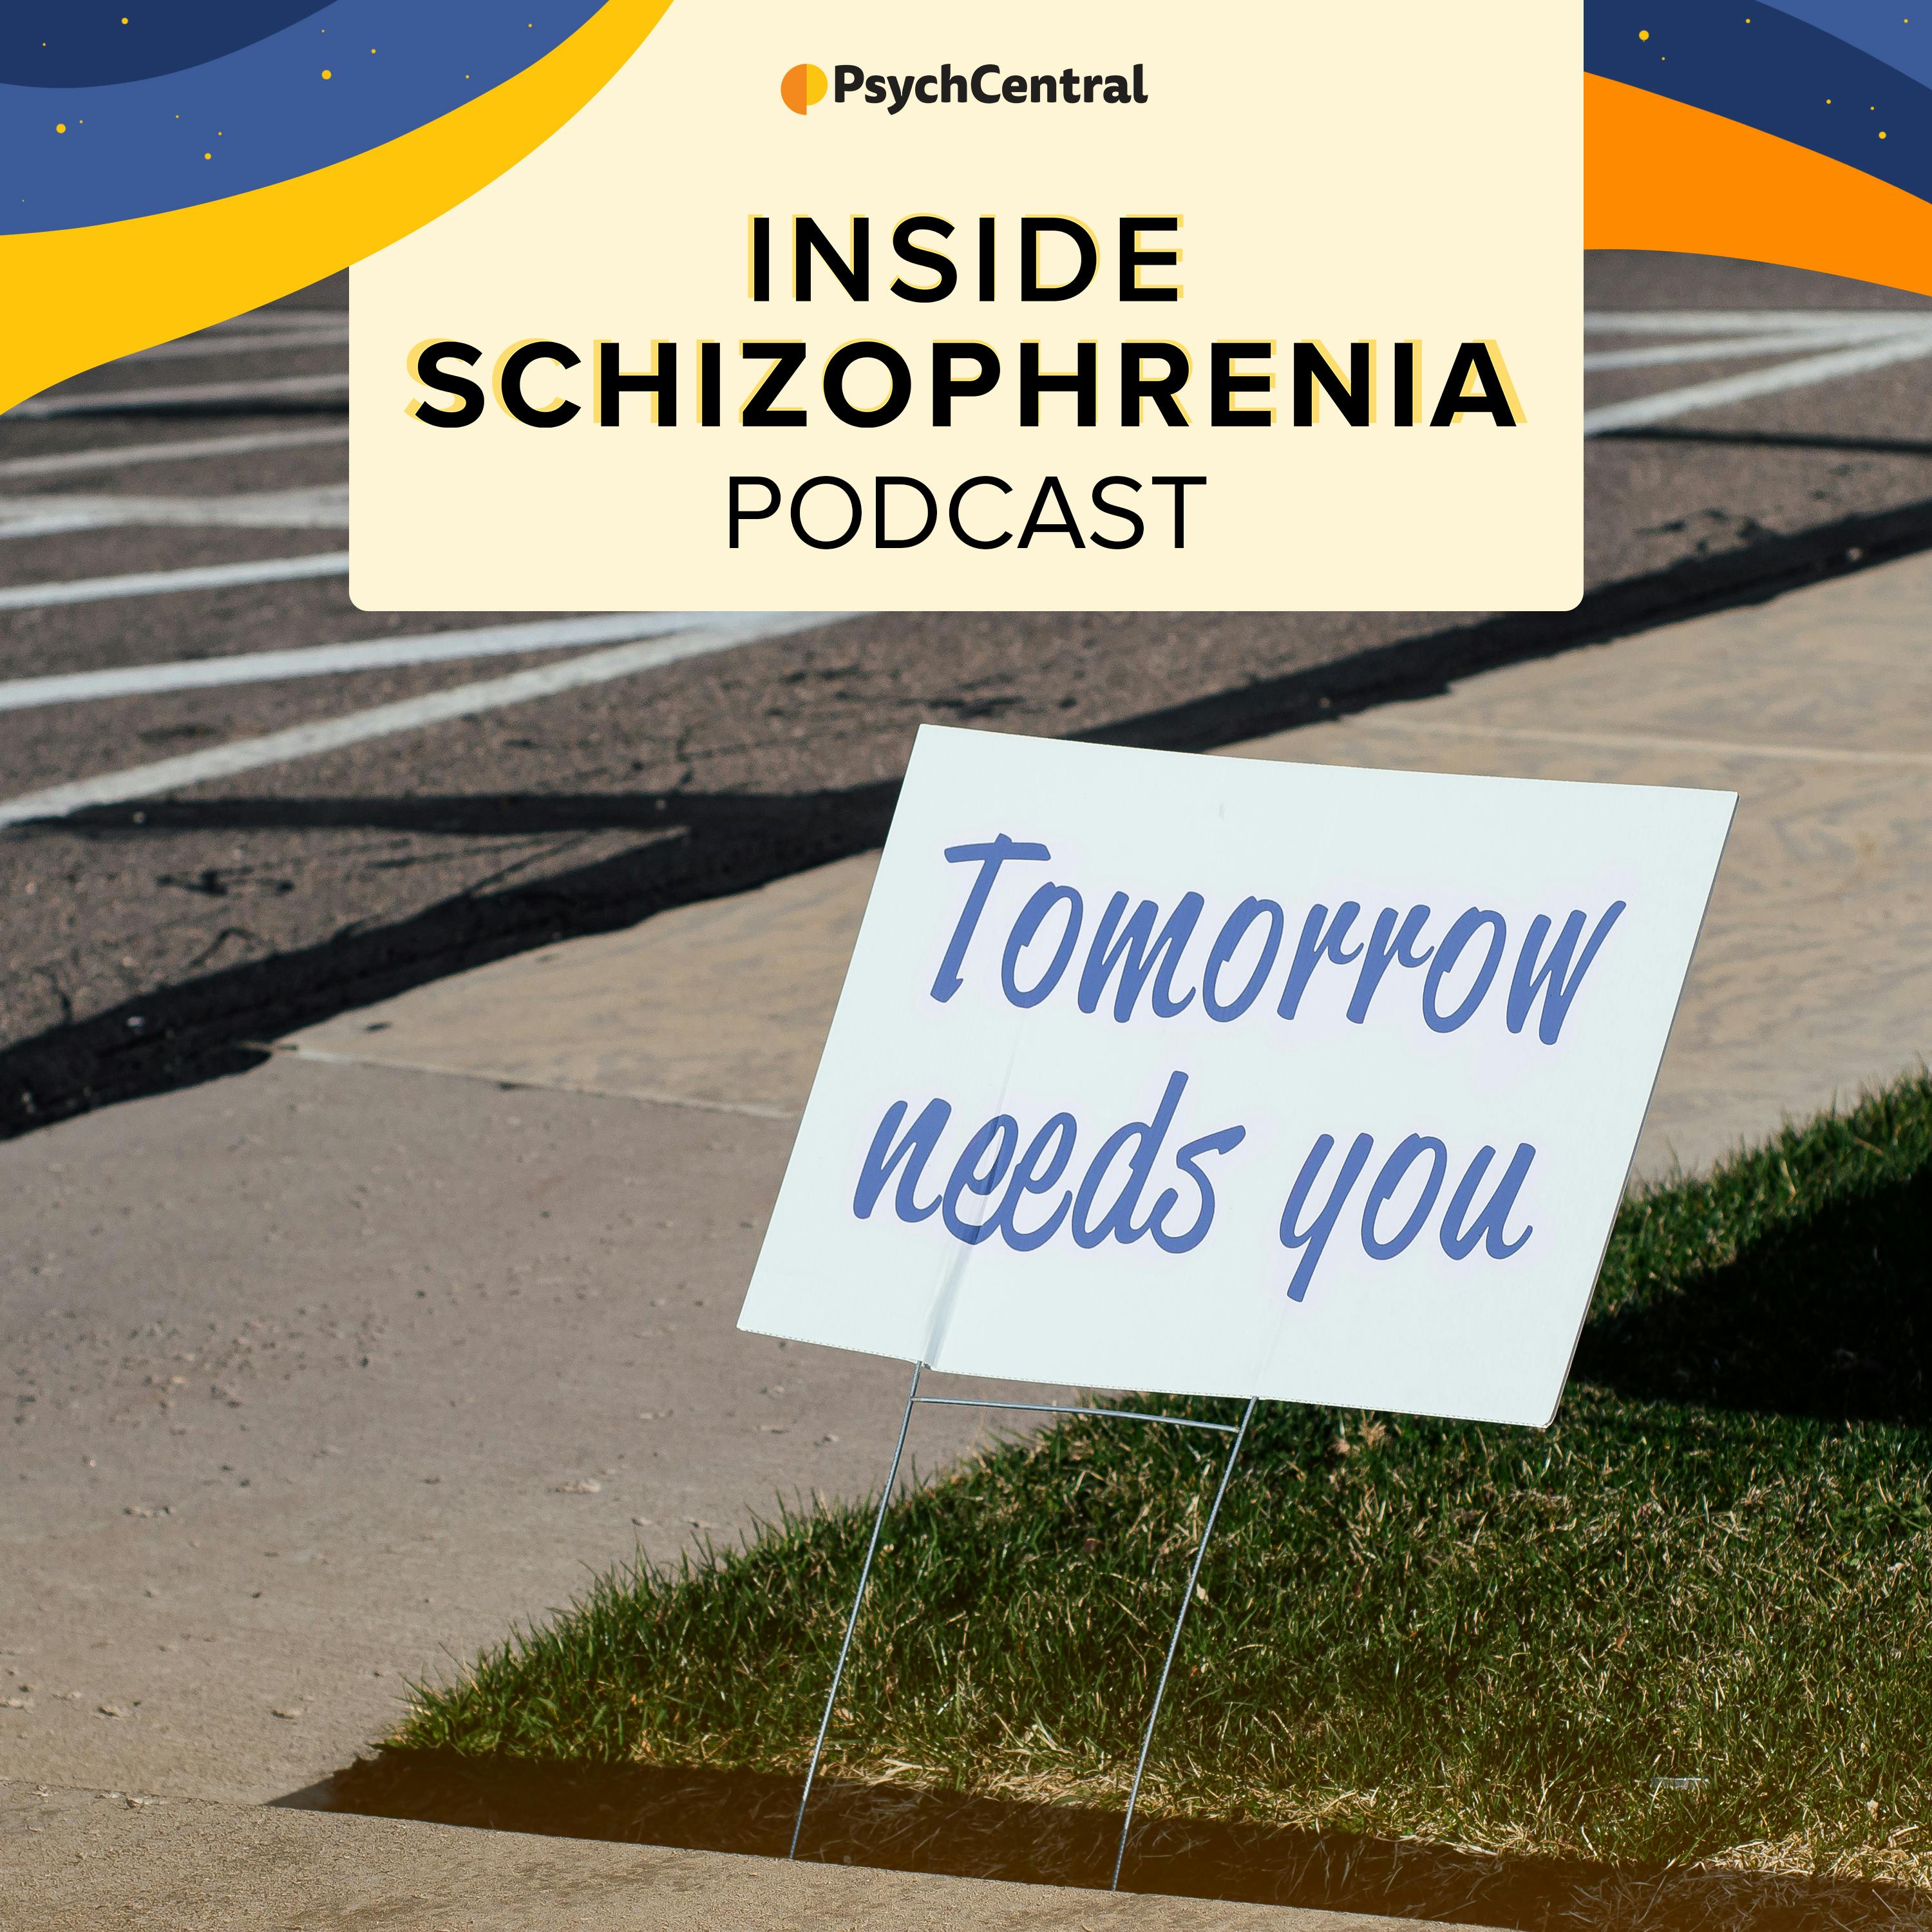 How Suicide Intersects with Schizophrenia